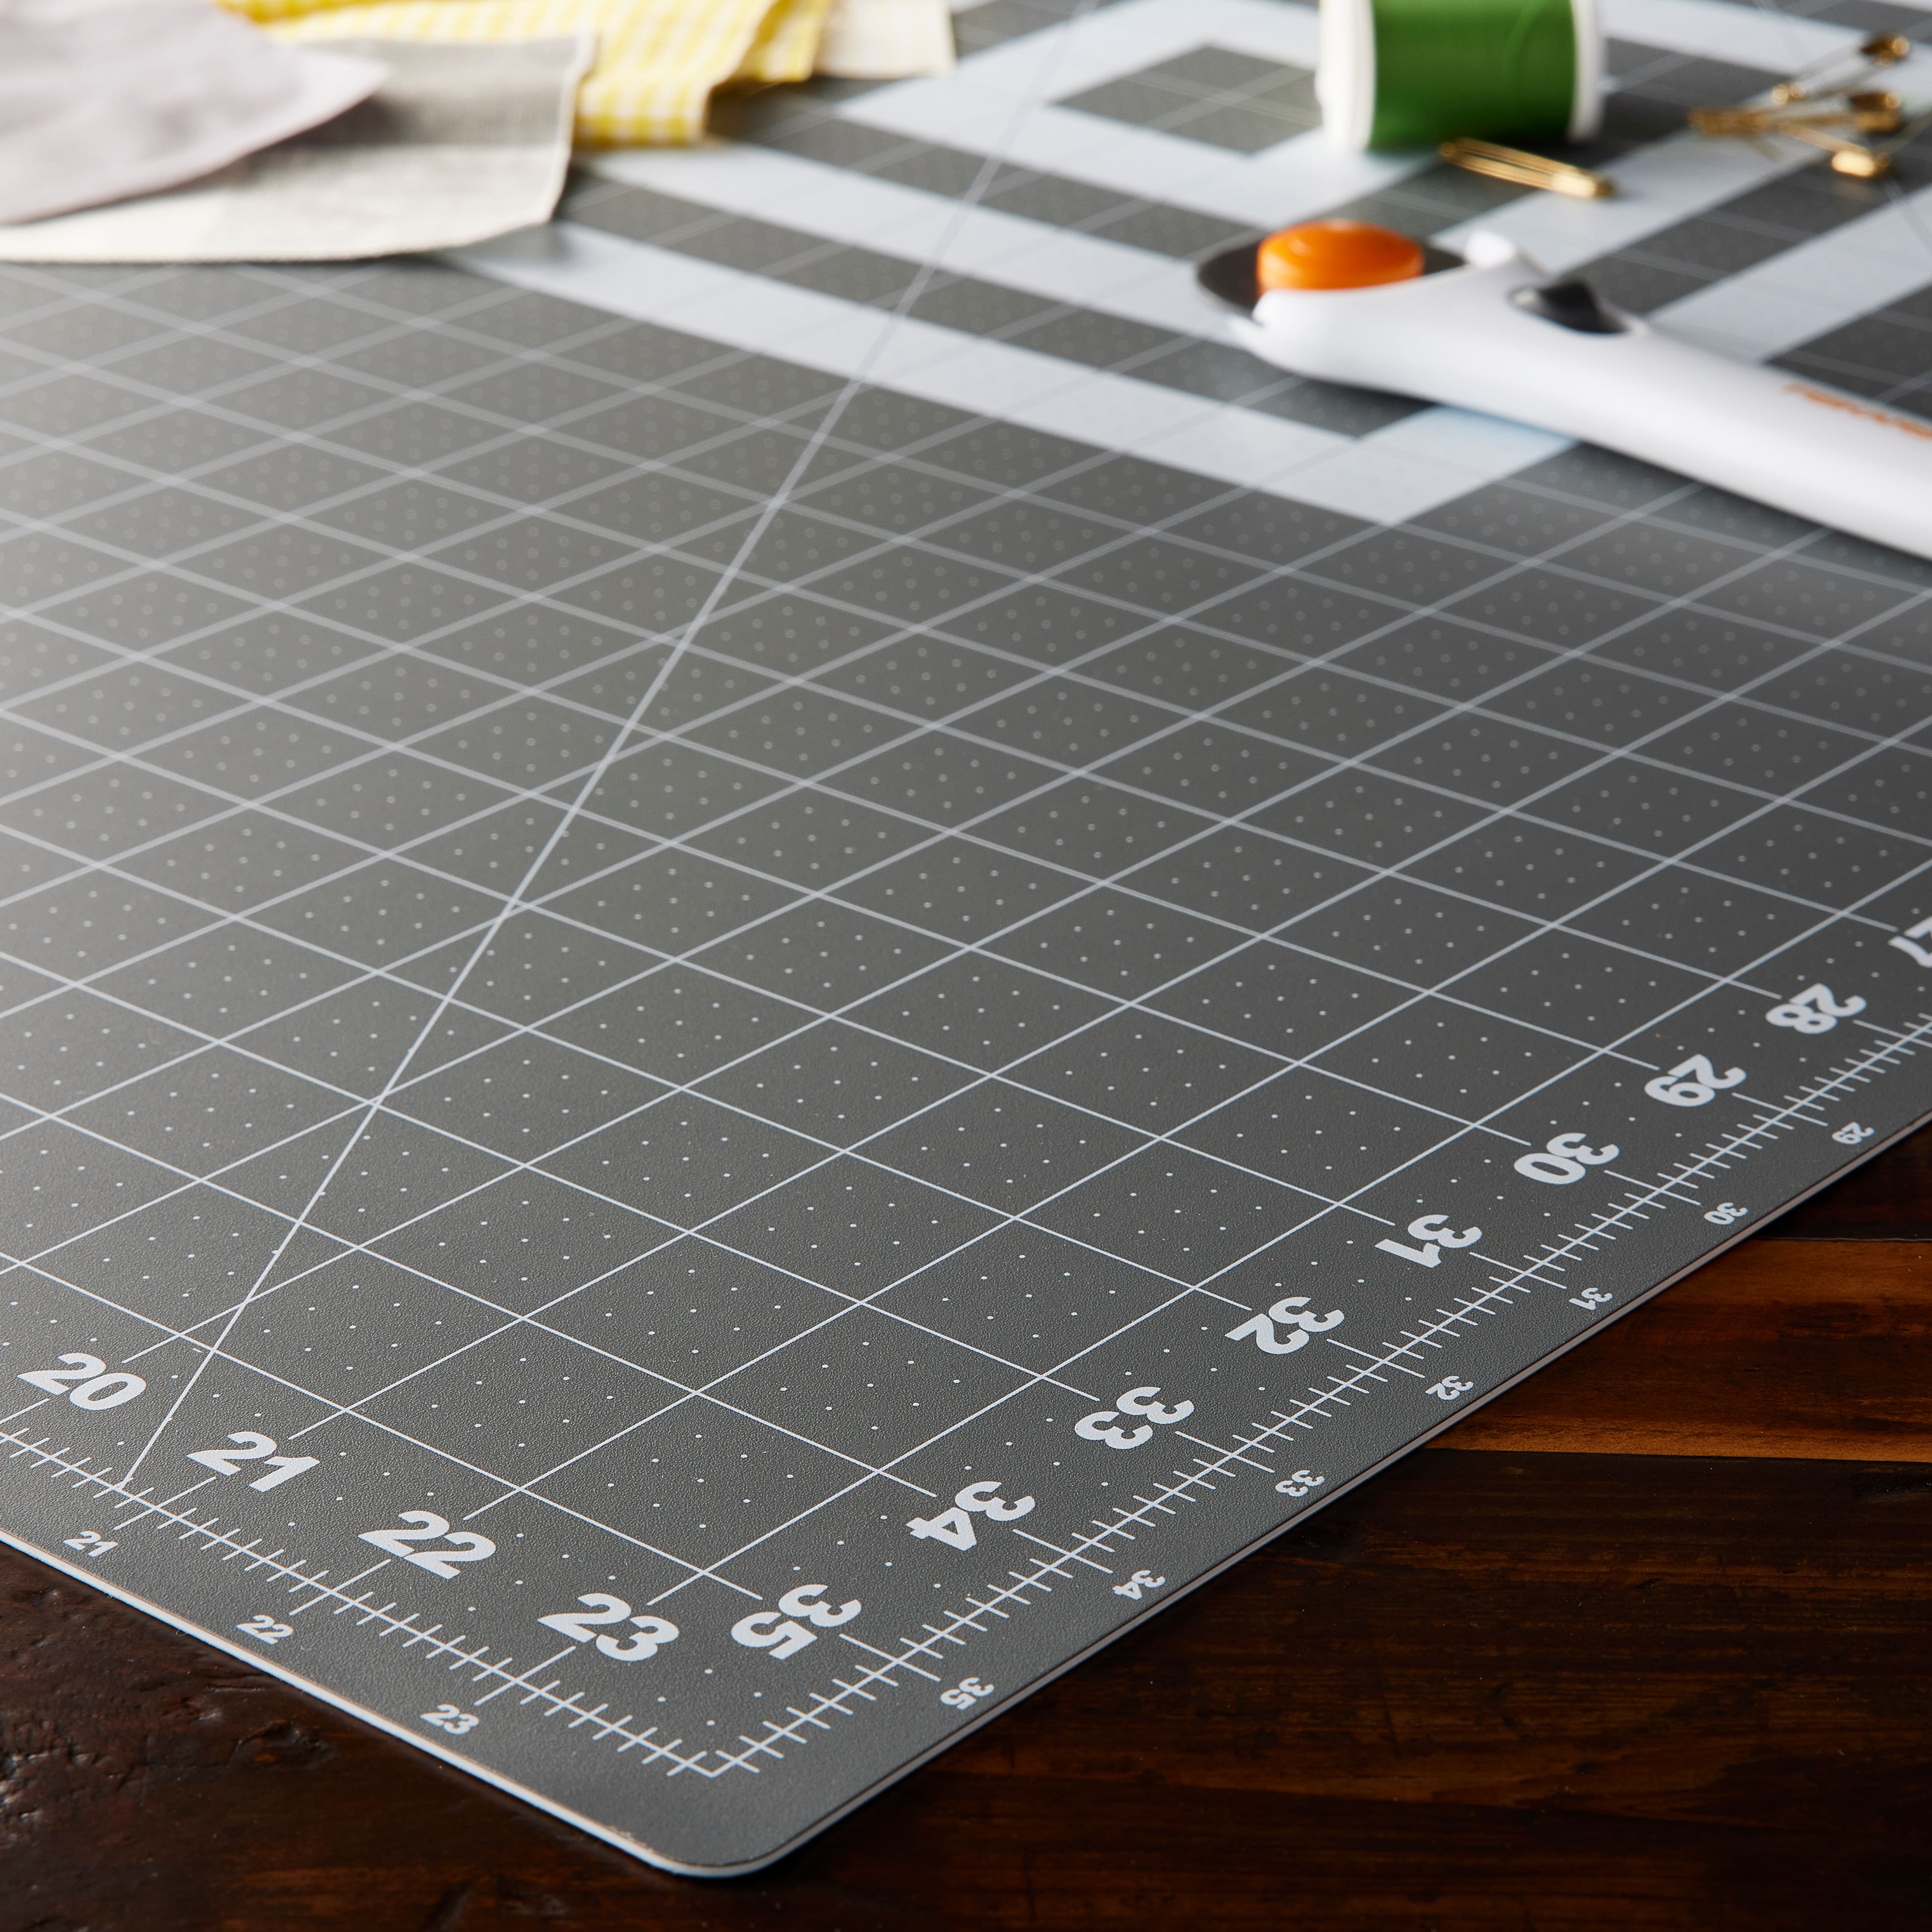 Fiskars 14x14 Inch Self Healing Rotating Cutting Mat & Craft Supplies: Self  Healing Cutting Mat for Crafts, Sewing, and Quilting Projects, 24x36?€?